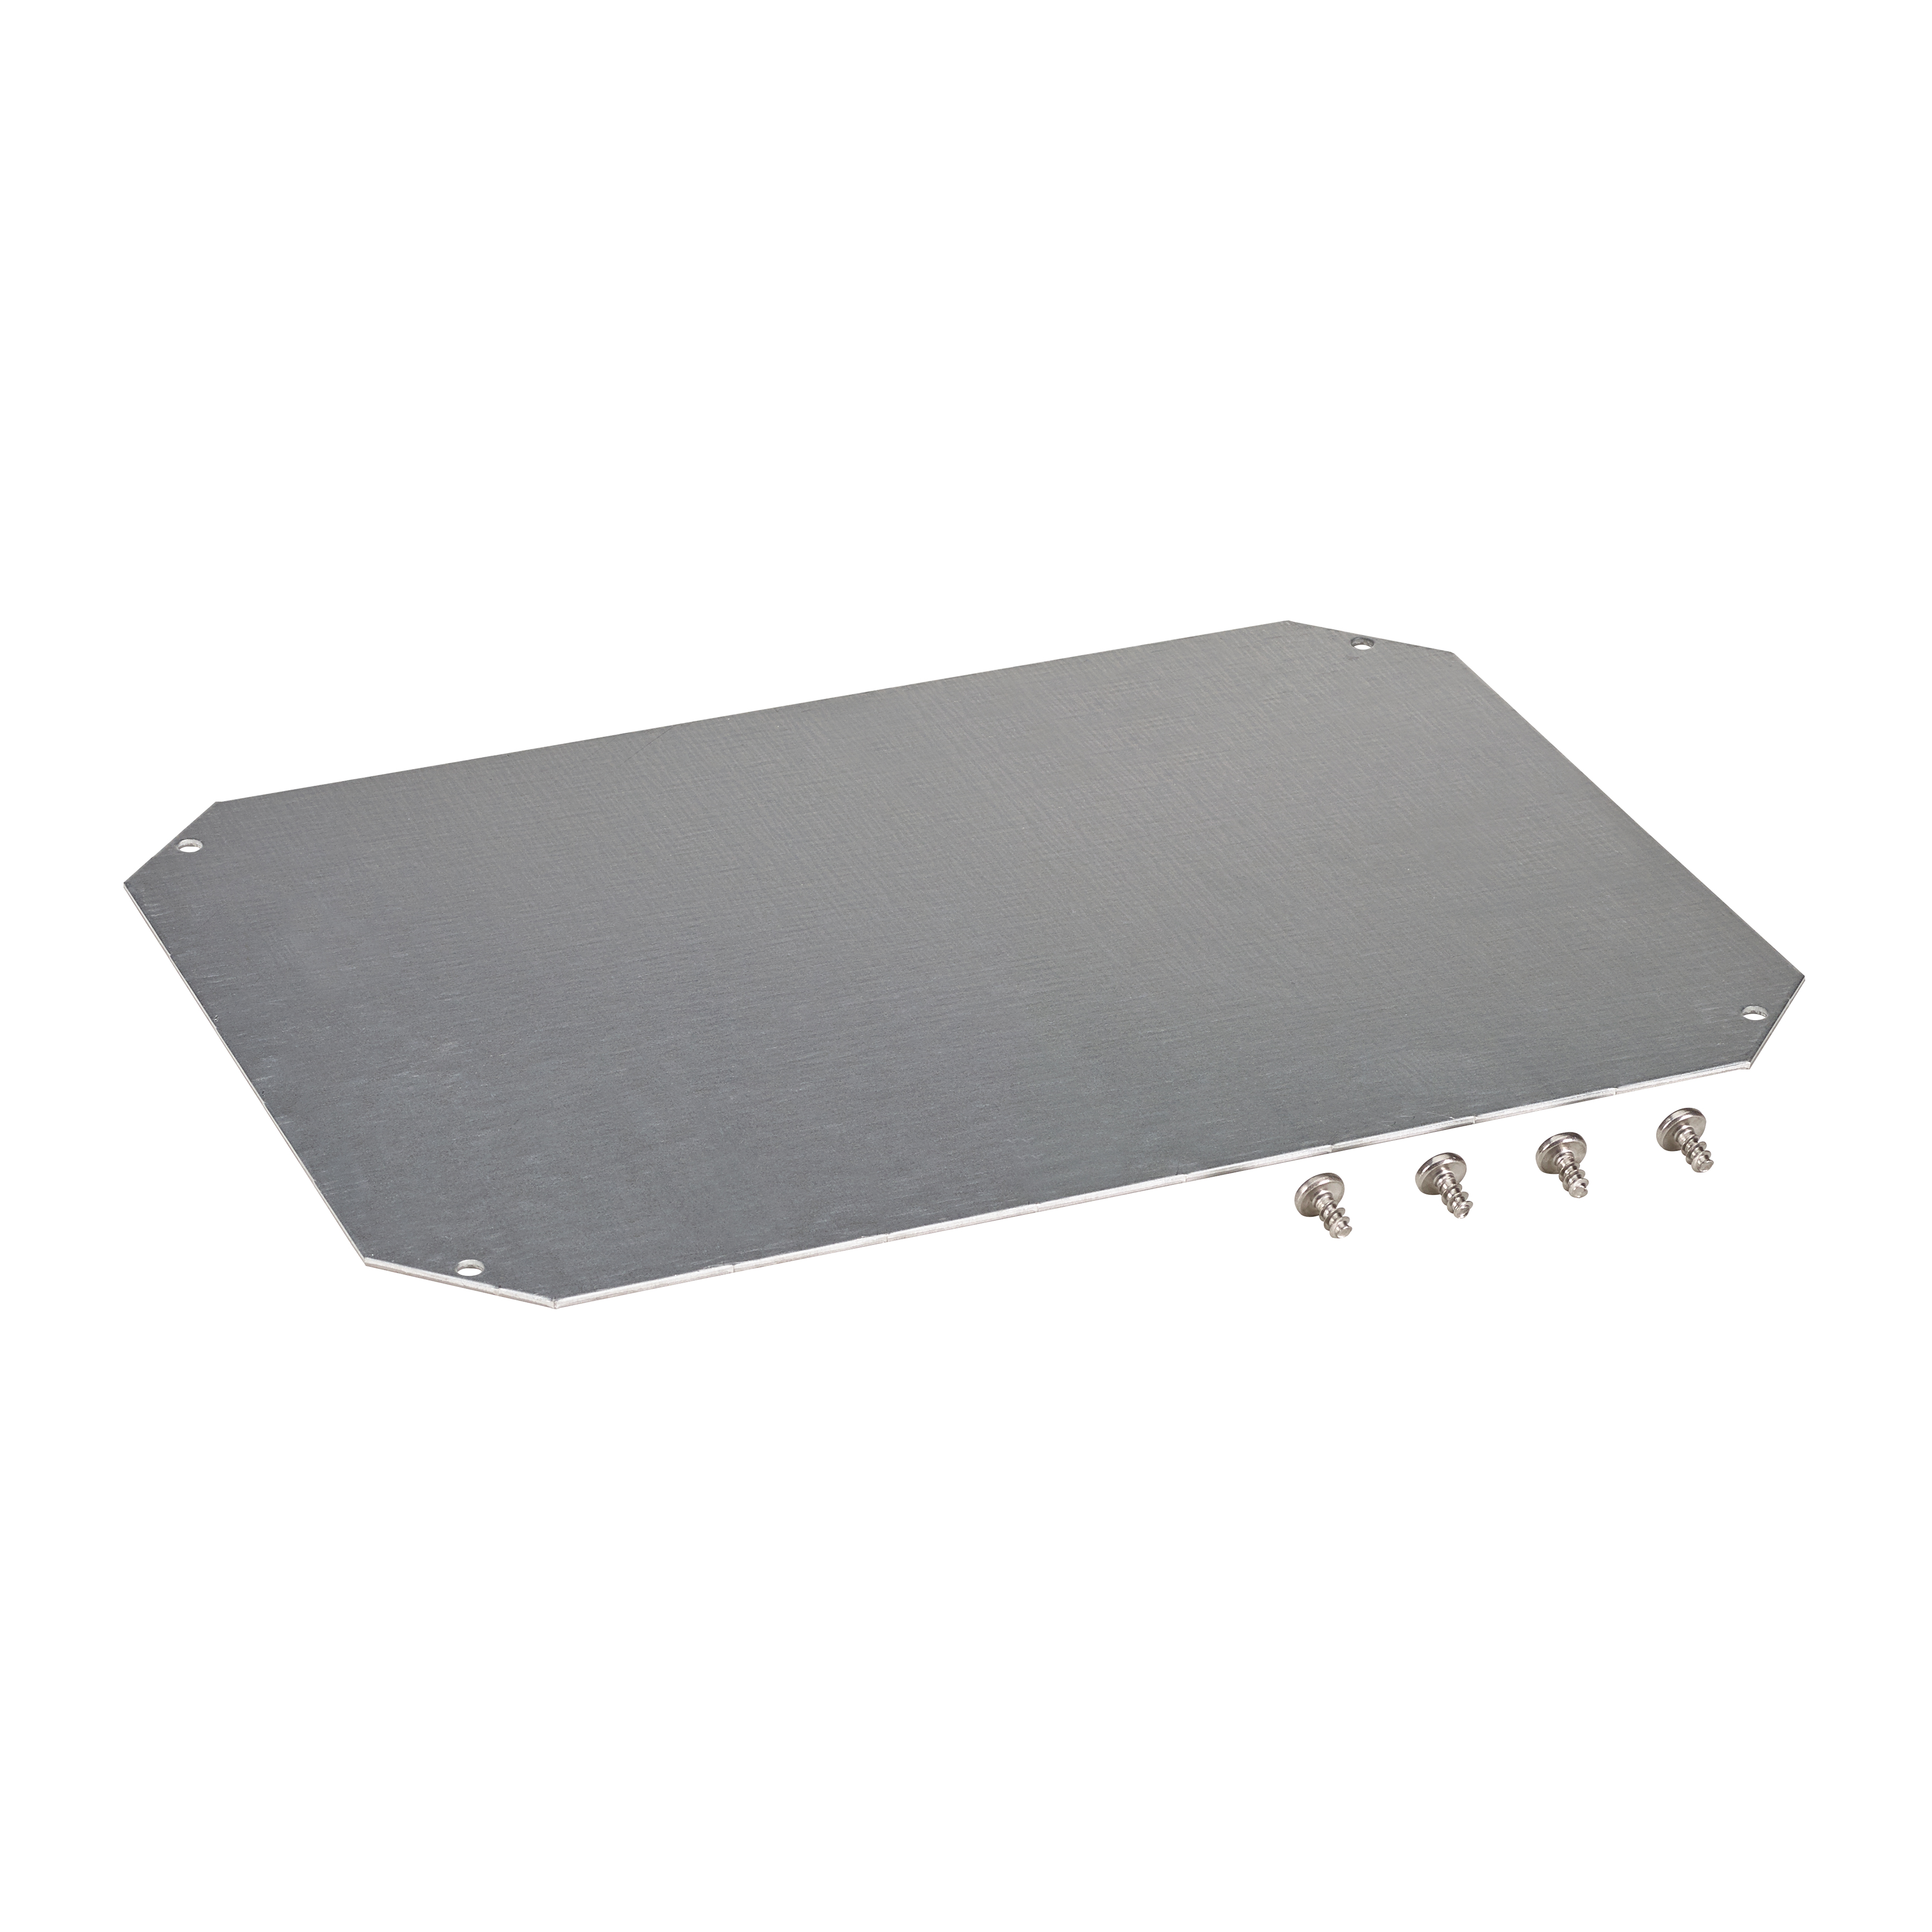 MPS ARCA 5040 Mounting plate